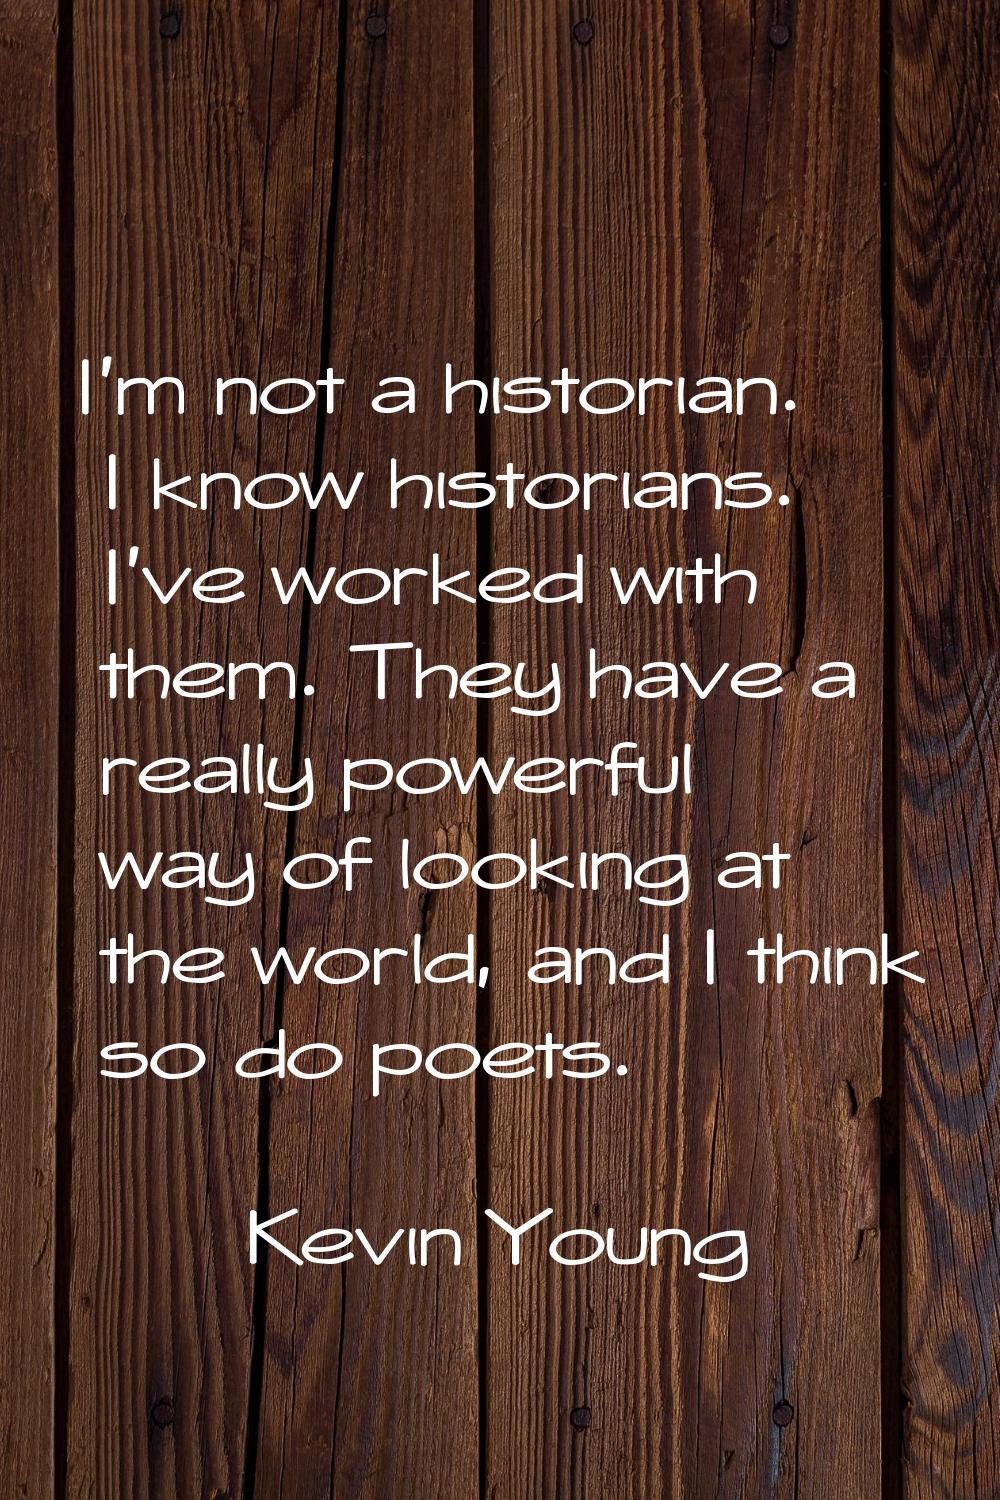 I'm not a historian. I know historians. I've worked with them. They have a really powerful way of l